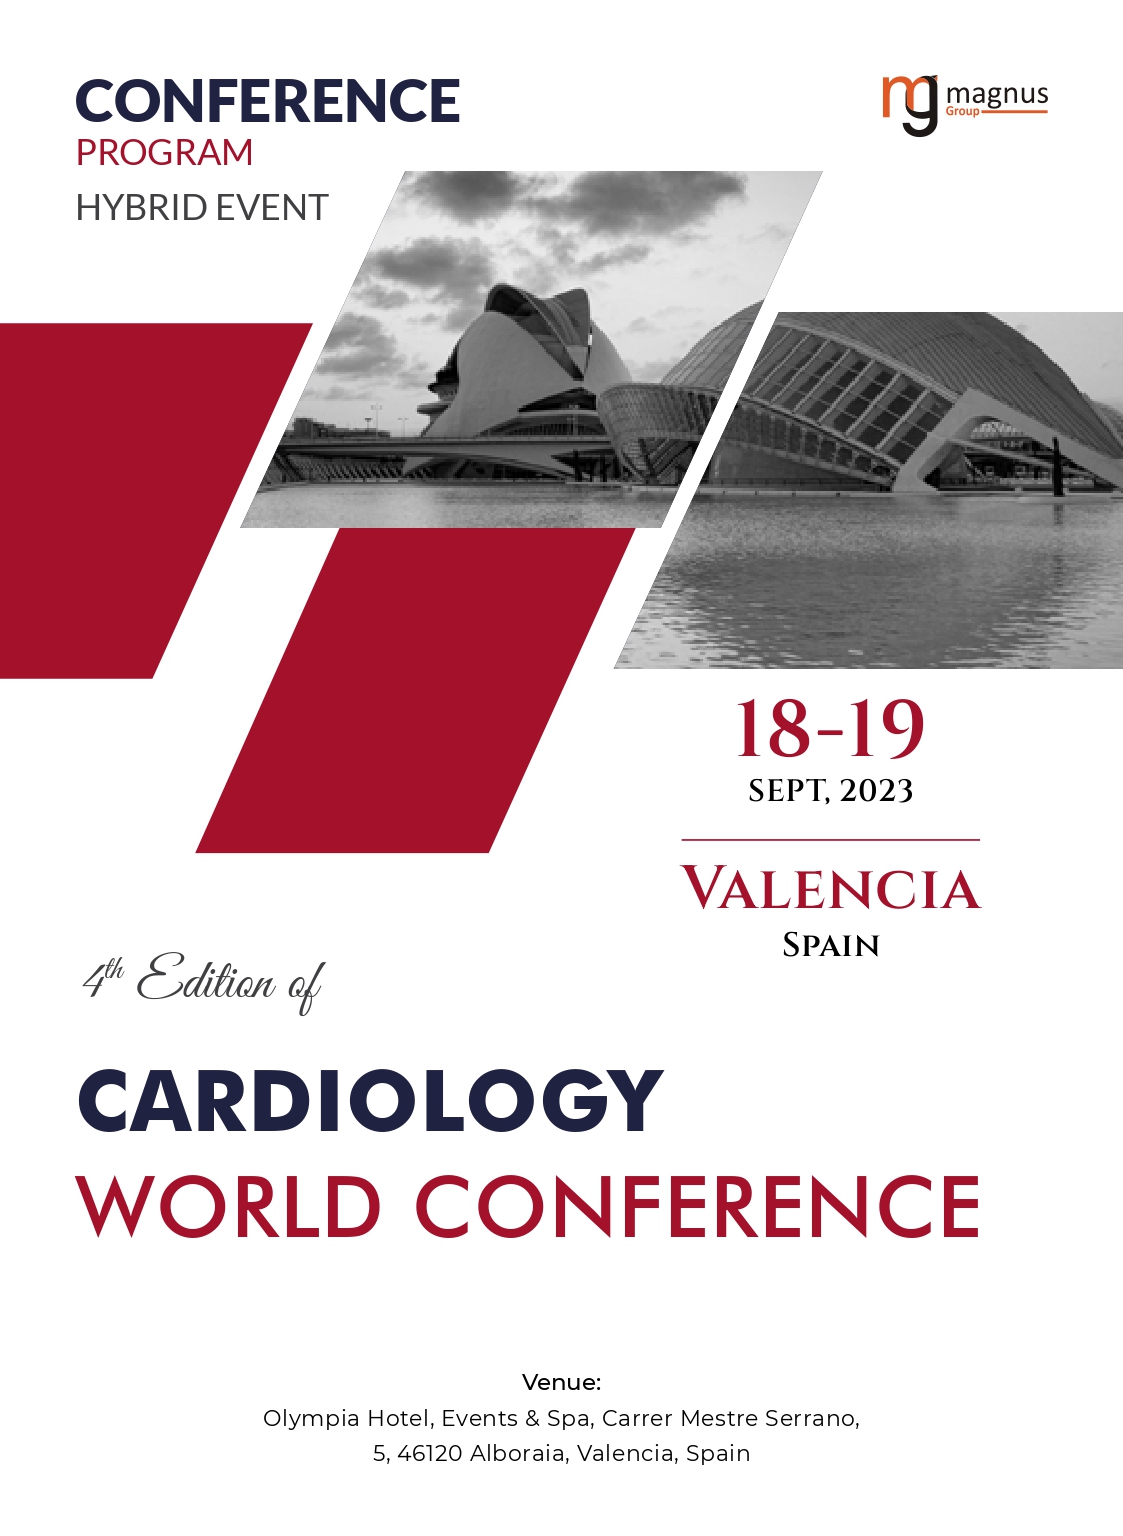 4th Edition of Cardiology World Conference | Valencia, Spain Program